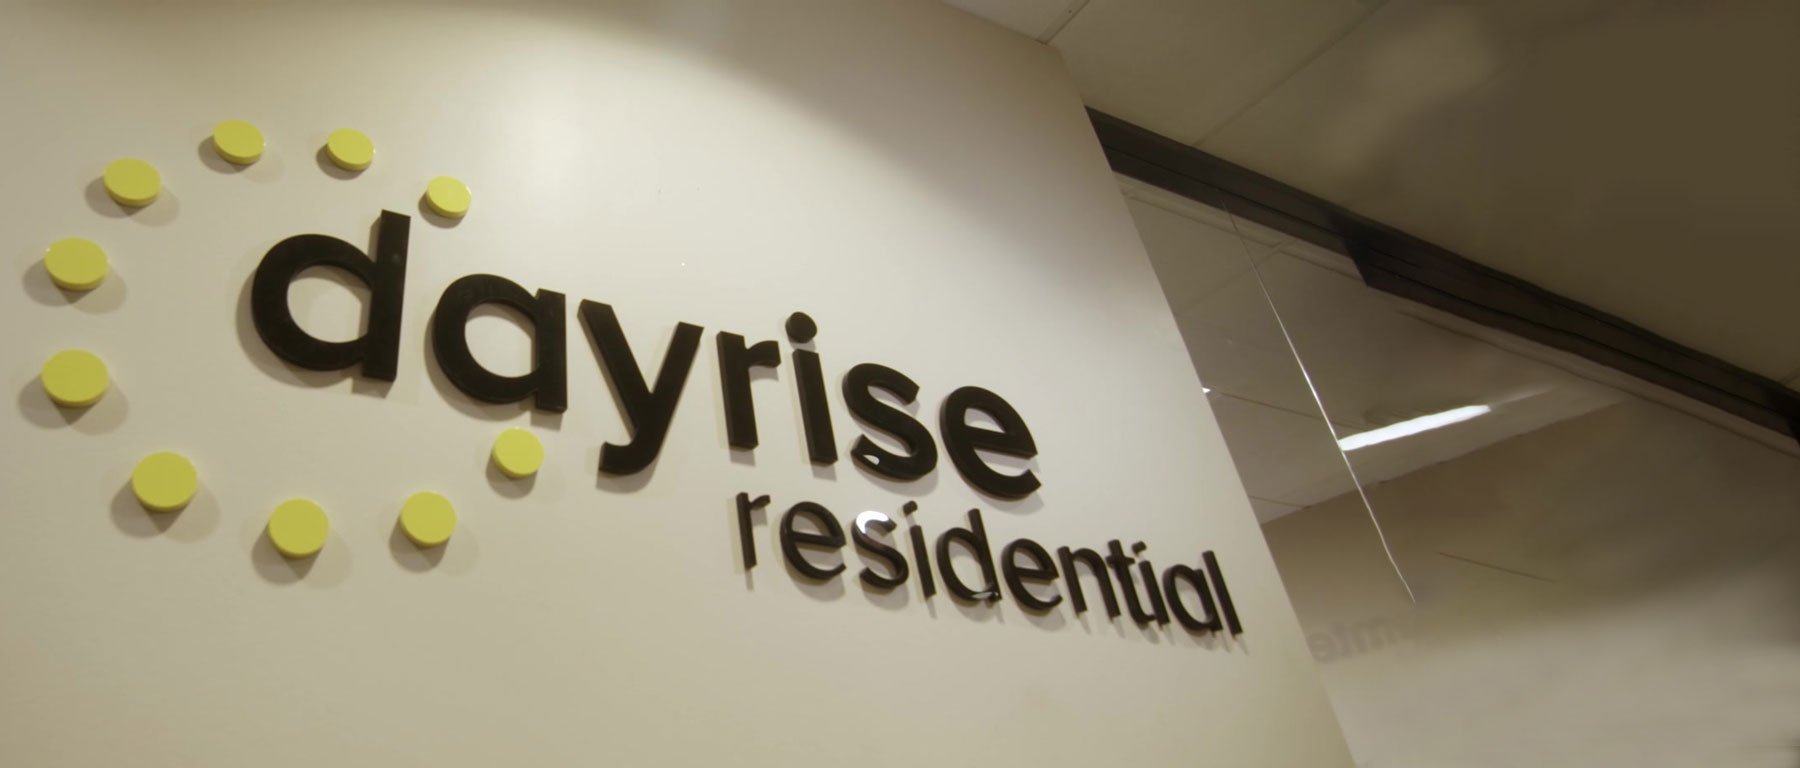 dayrise-residential-wall-sign